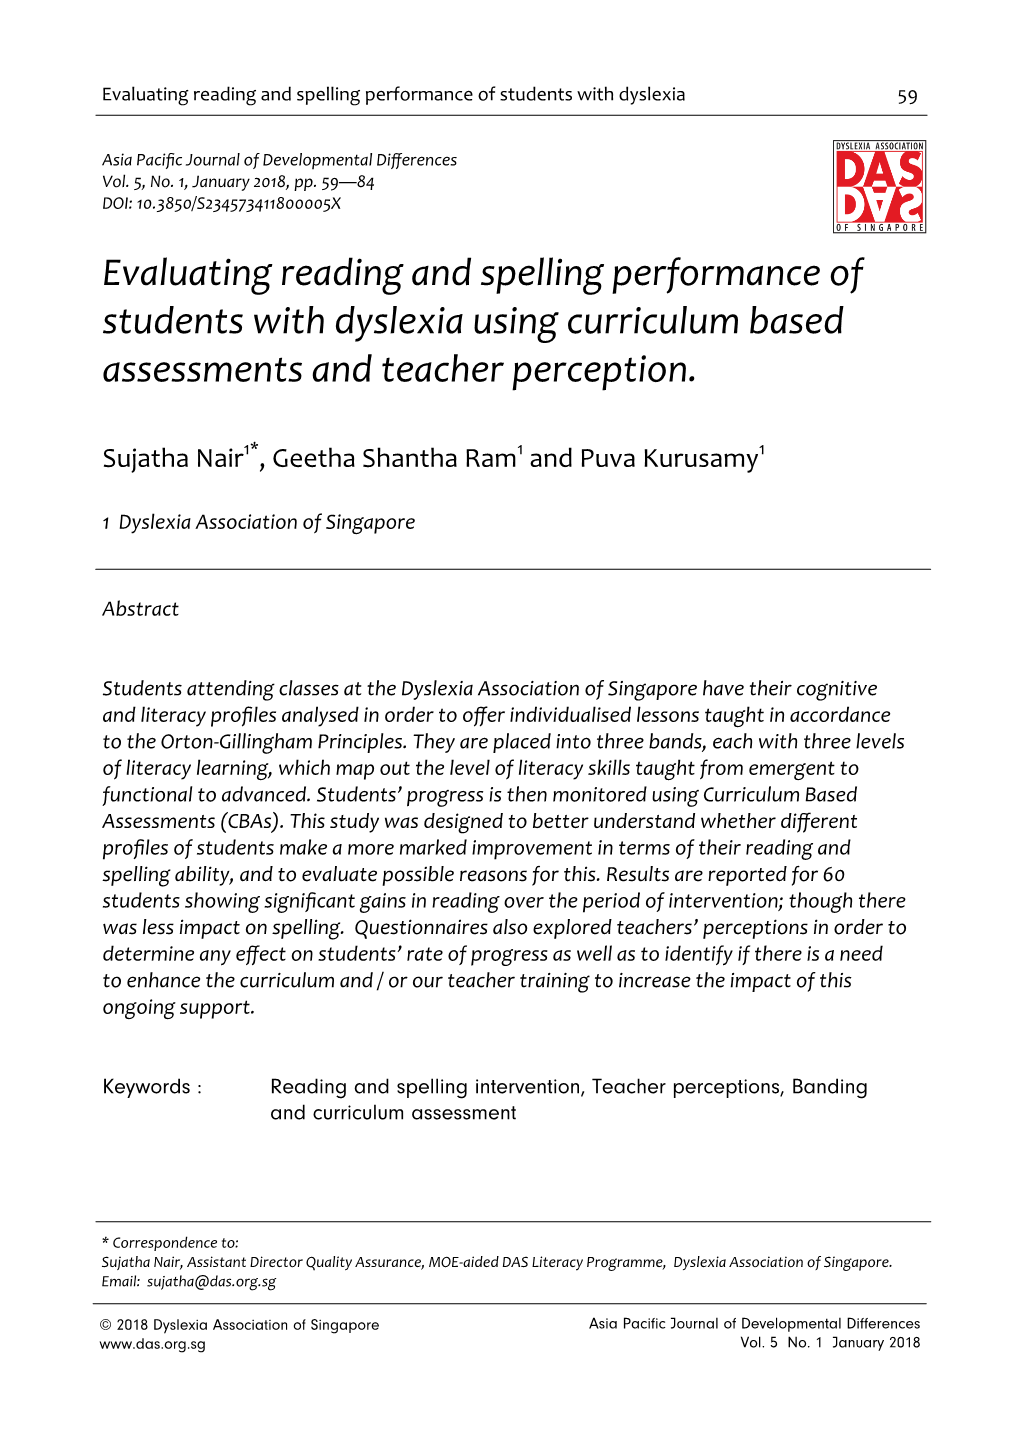 Evaluating Reading and Spelling Performance of Students with Dyslexia Using Curriculum Based Assessments and Teacher Perception